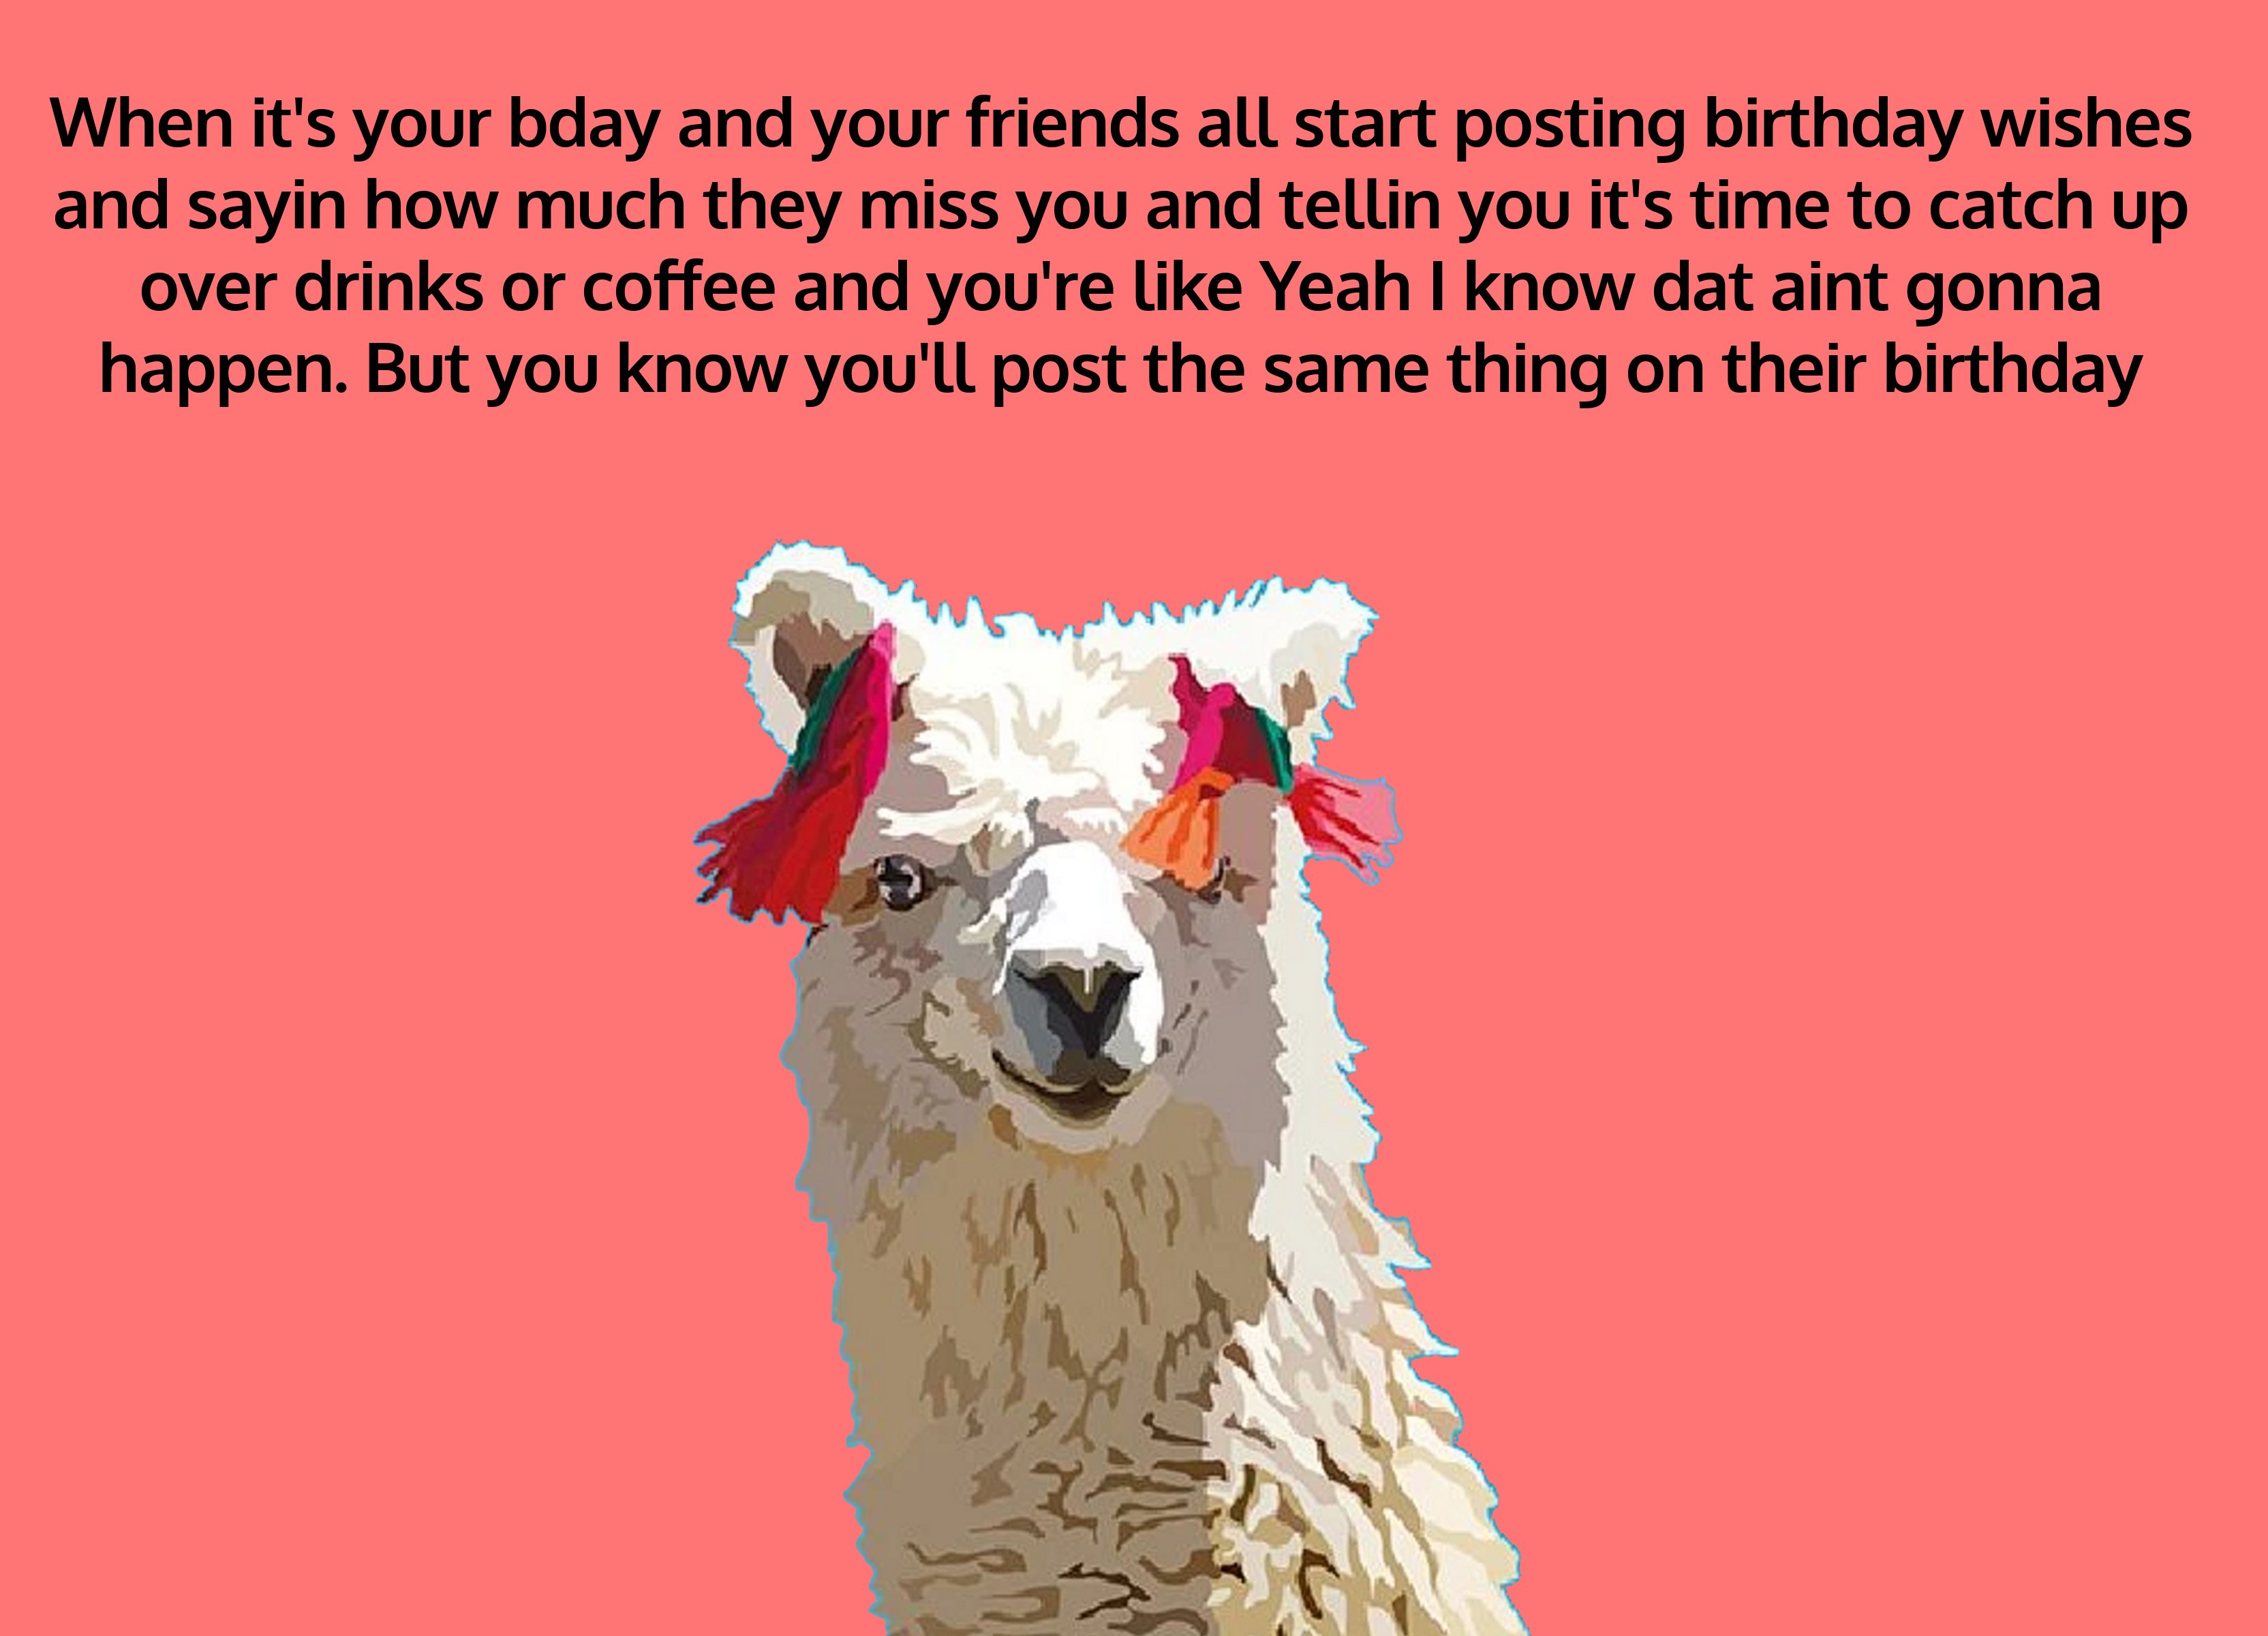 llama - When it's your bday and your friends all start posting birthday wishes and sayin how much they miss you and tellin you it's time to catch up over drinks or coffee and you're Yeah I know dat aint gonna happen. But you know you'll post the same thin